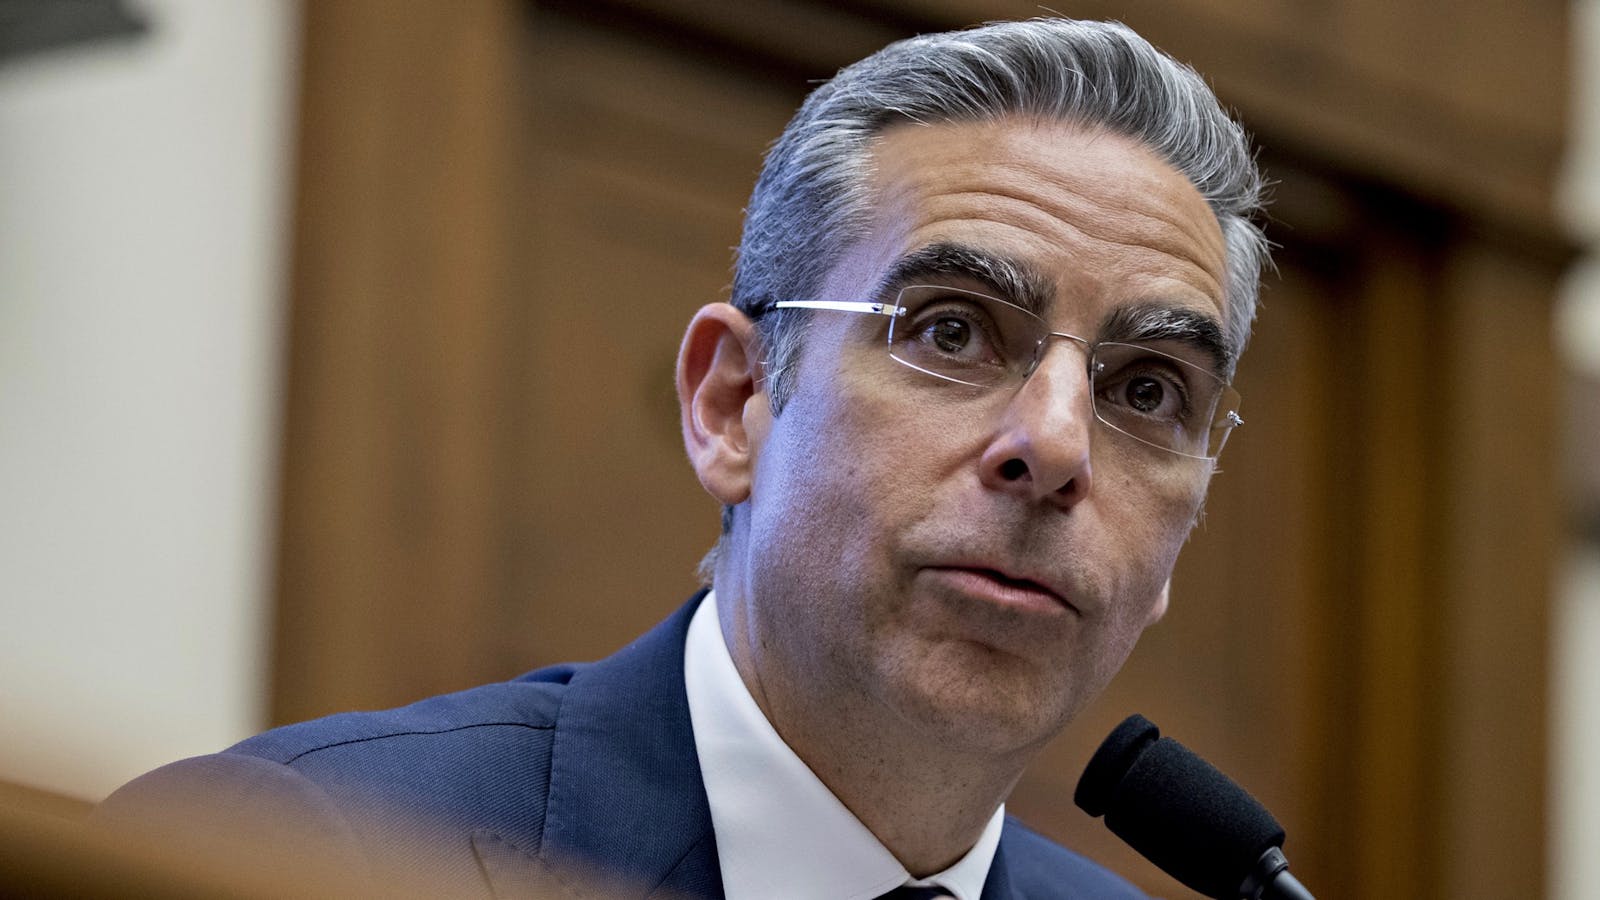 Facebook's David Marcus during a House Financial Services Committee hearing in July. Photo: Bloomberg